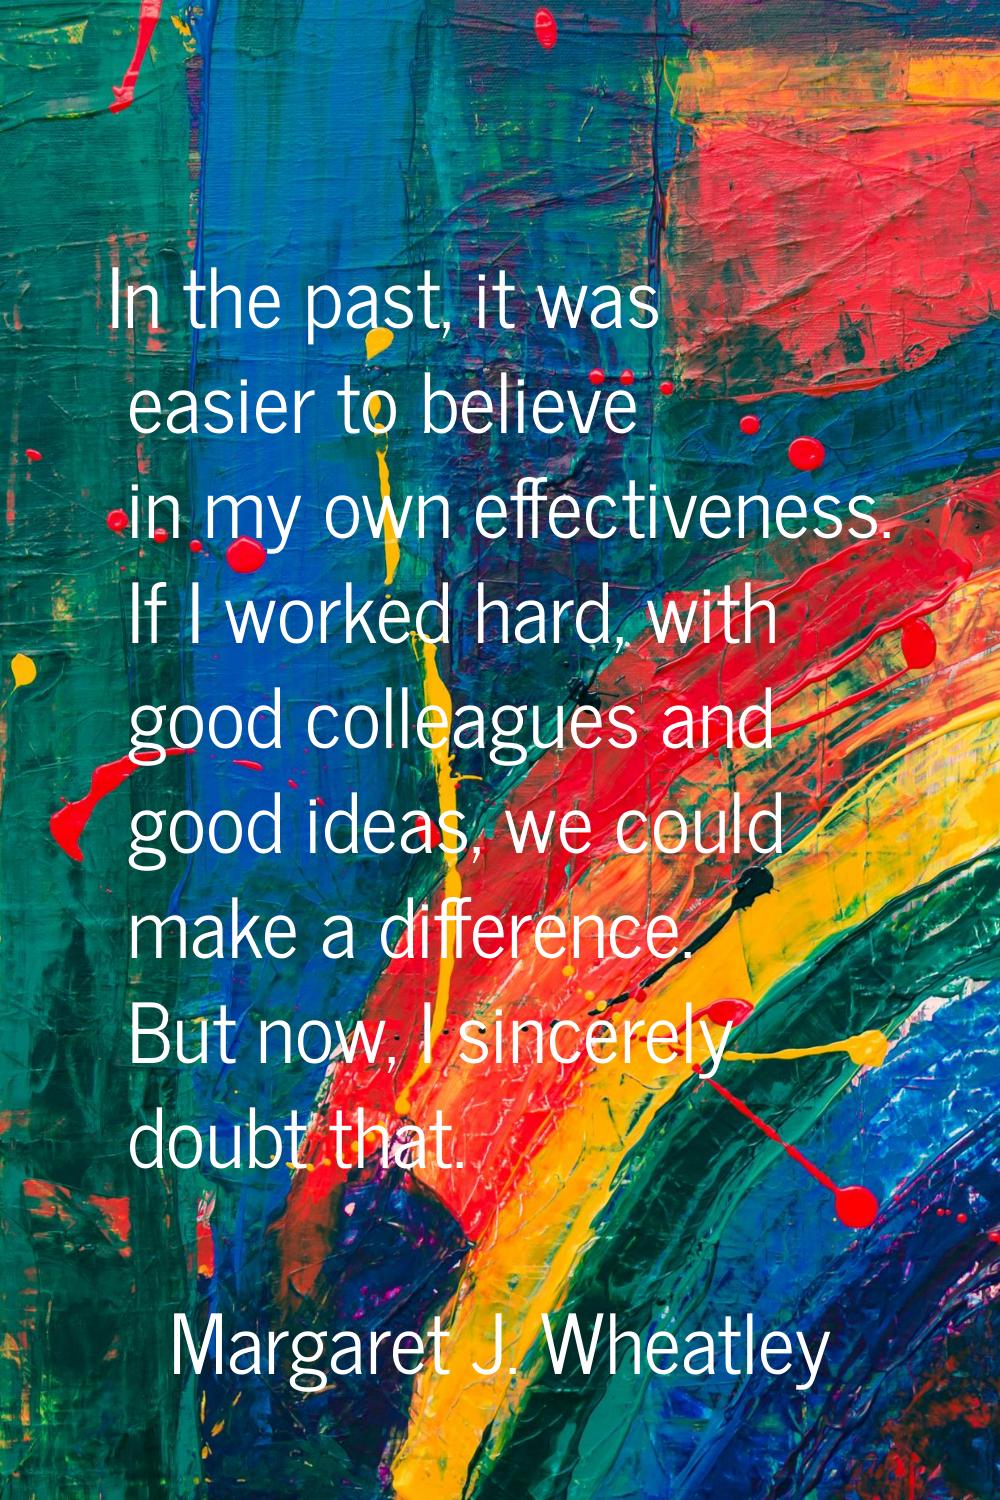 In the past, it was easier to believe in my own effectiveness. If I worked hard, with good colleagu